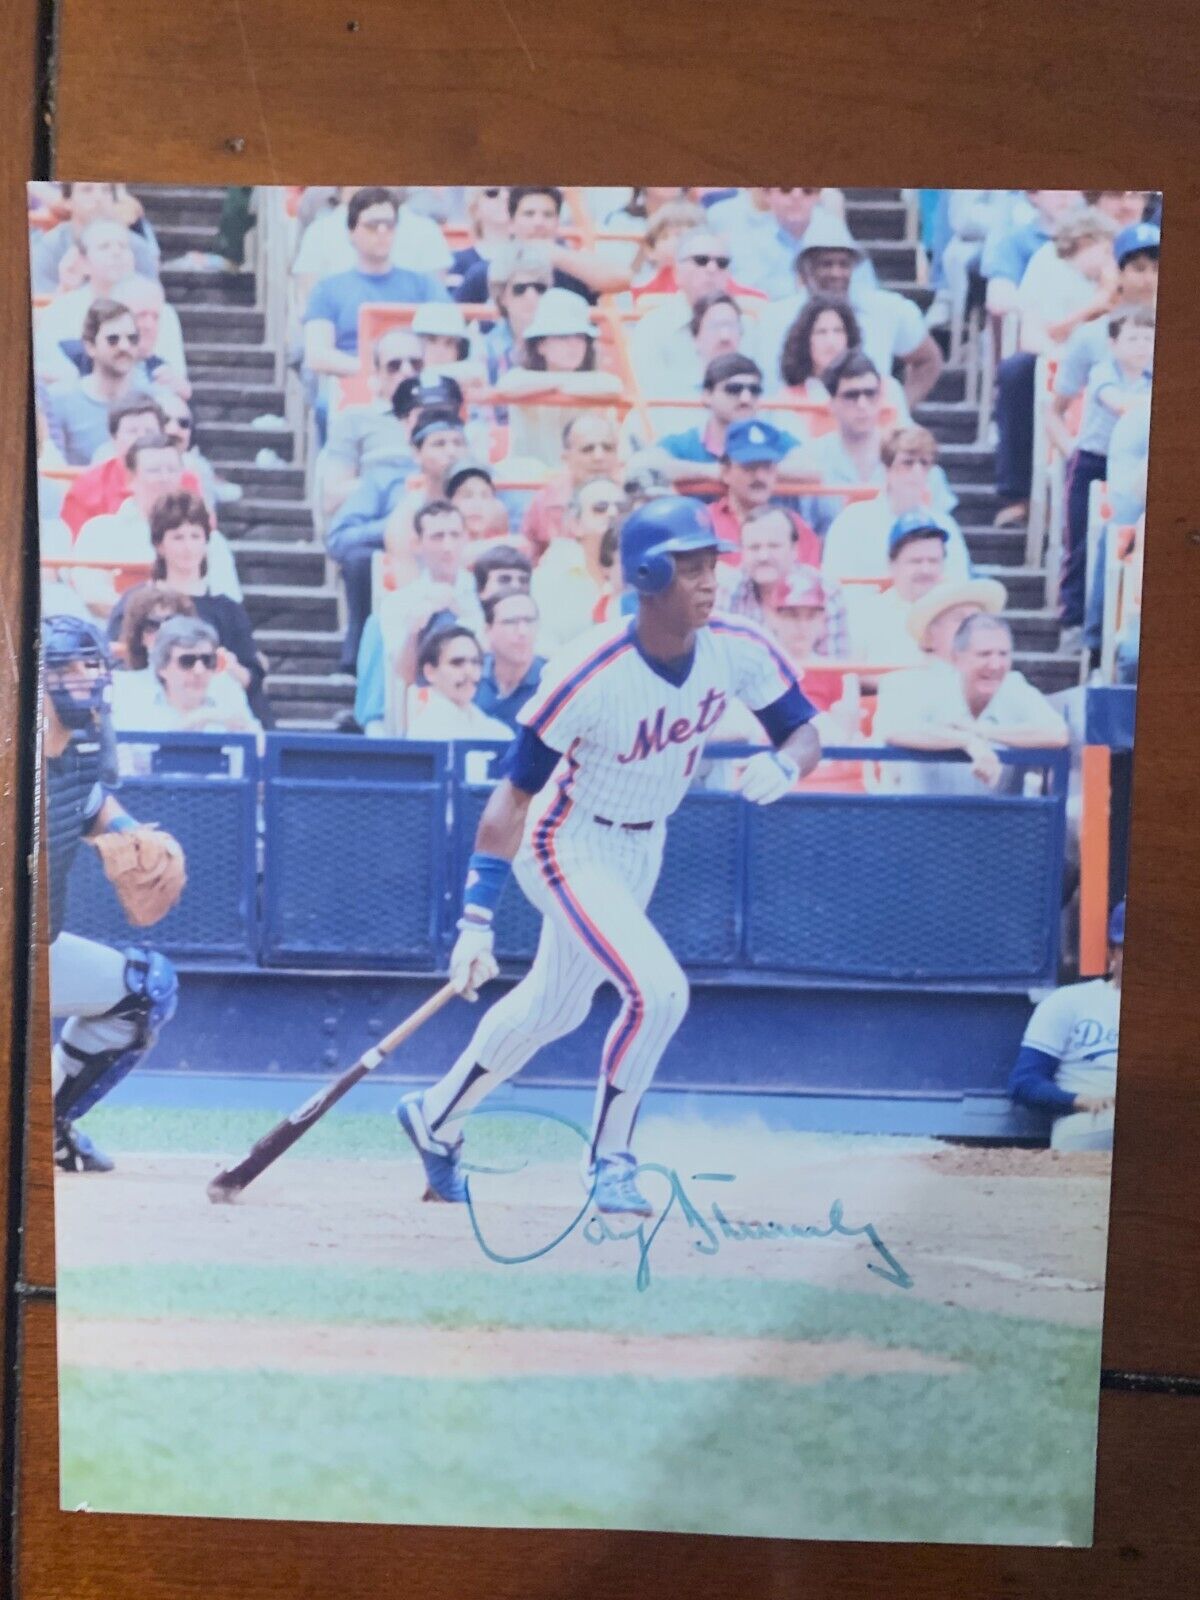 Daryl Strawberry Autographed 8x10 Photo Bundle with Trading Cards